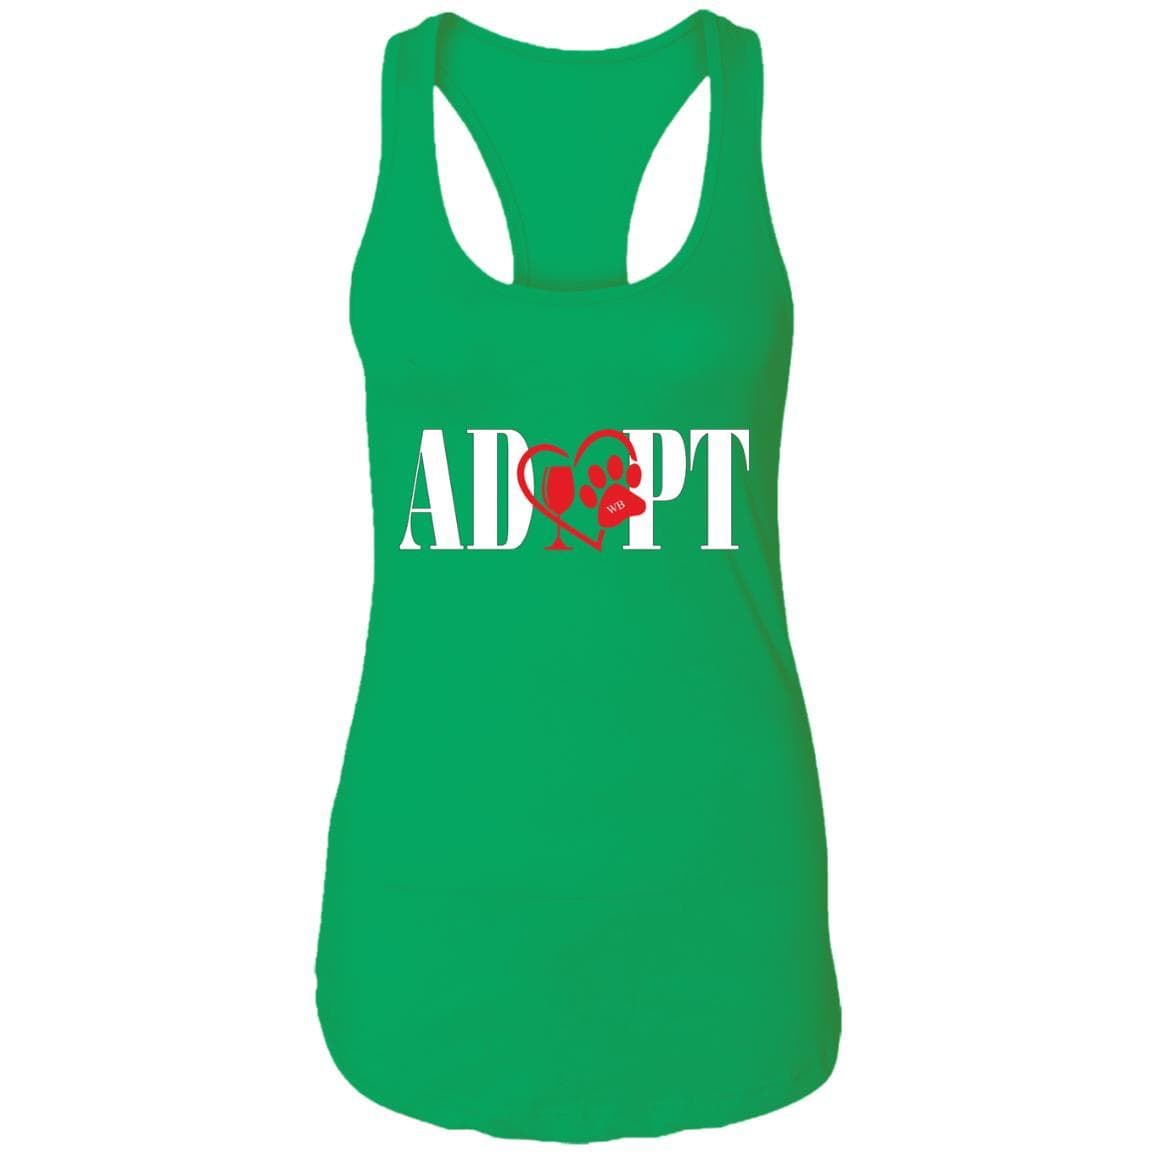 T-Shirts Kelly Green / X-Small WineyBitches.Co “Adopt” Ladies Ideal Racerback Tank-Red Heart - Wht Lettering WineyBitchesCo